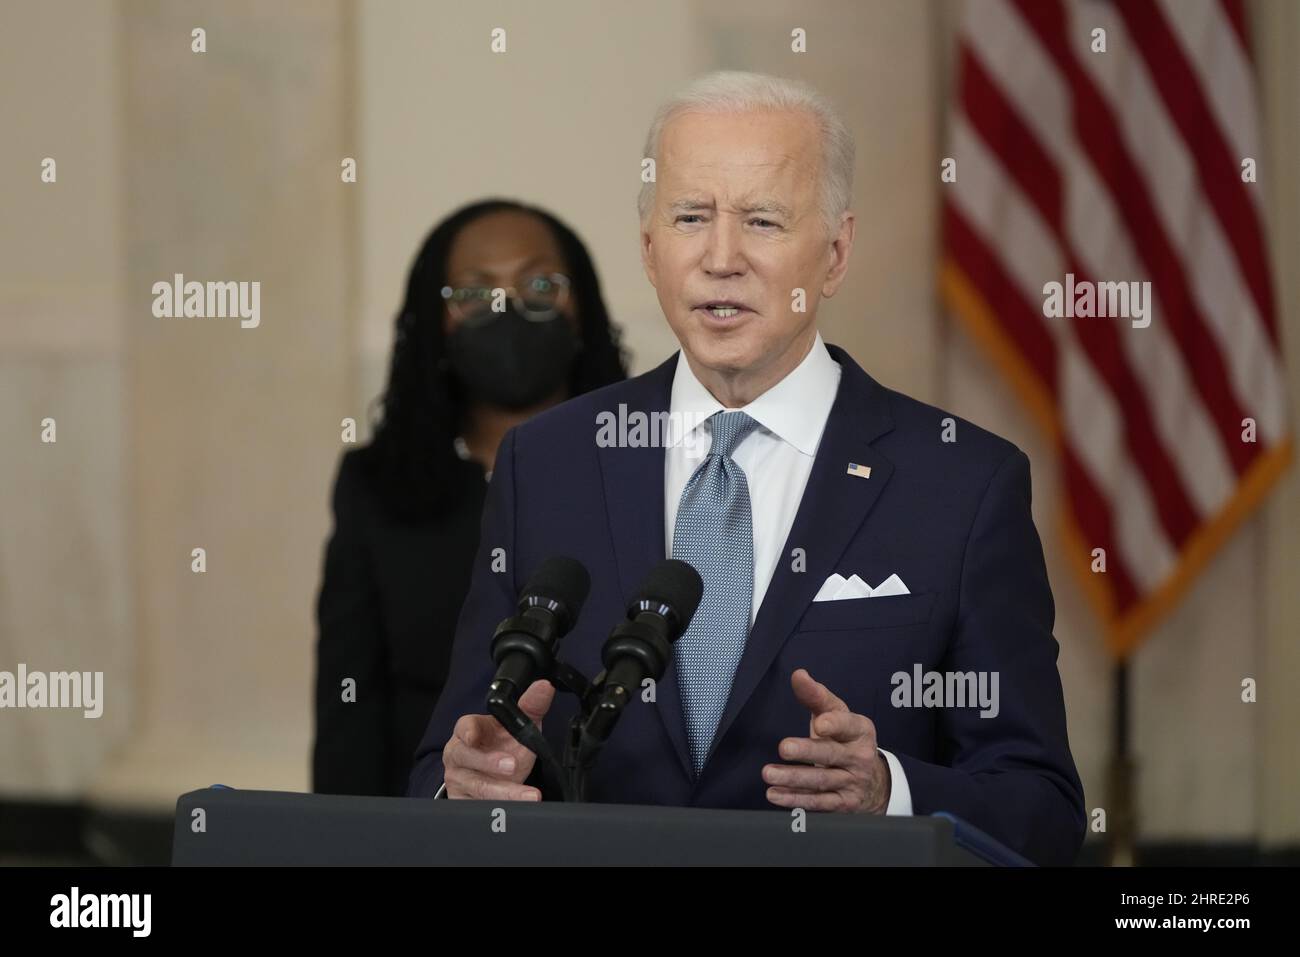 Washington DC, USA. 25th Feb, 2022. United States President Joe Biden makes remarks on his nomination of Judge Ketanji Brown Jackson to serve as Associate Justice of the US Supreme Court, in the Cross Hall of the White House in Washington, DC on Friday, February 25, 2022. Credit: Chris Kleponis/CNP /MediaPunch Credit: MediaPunch Inc/Alamy Live News Stock Photo